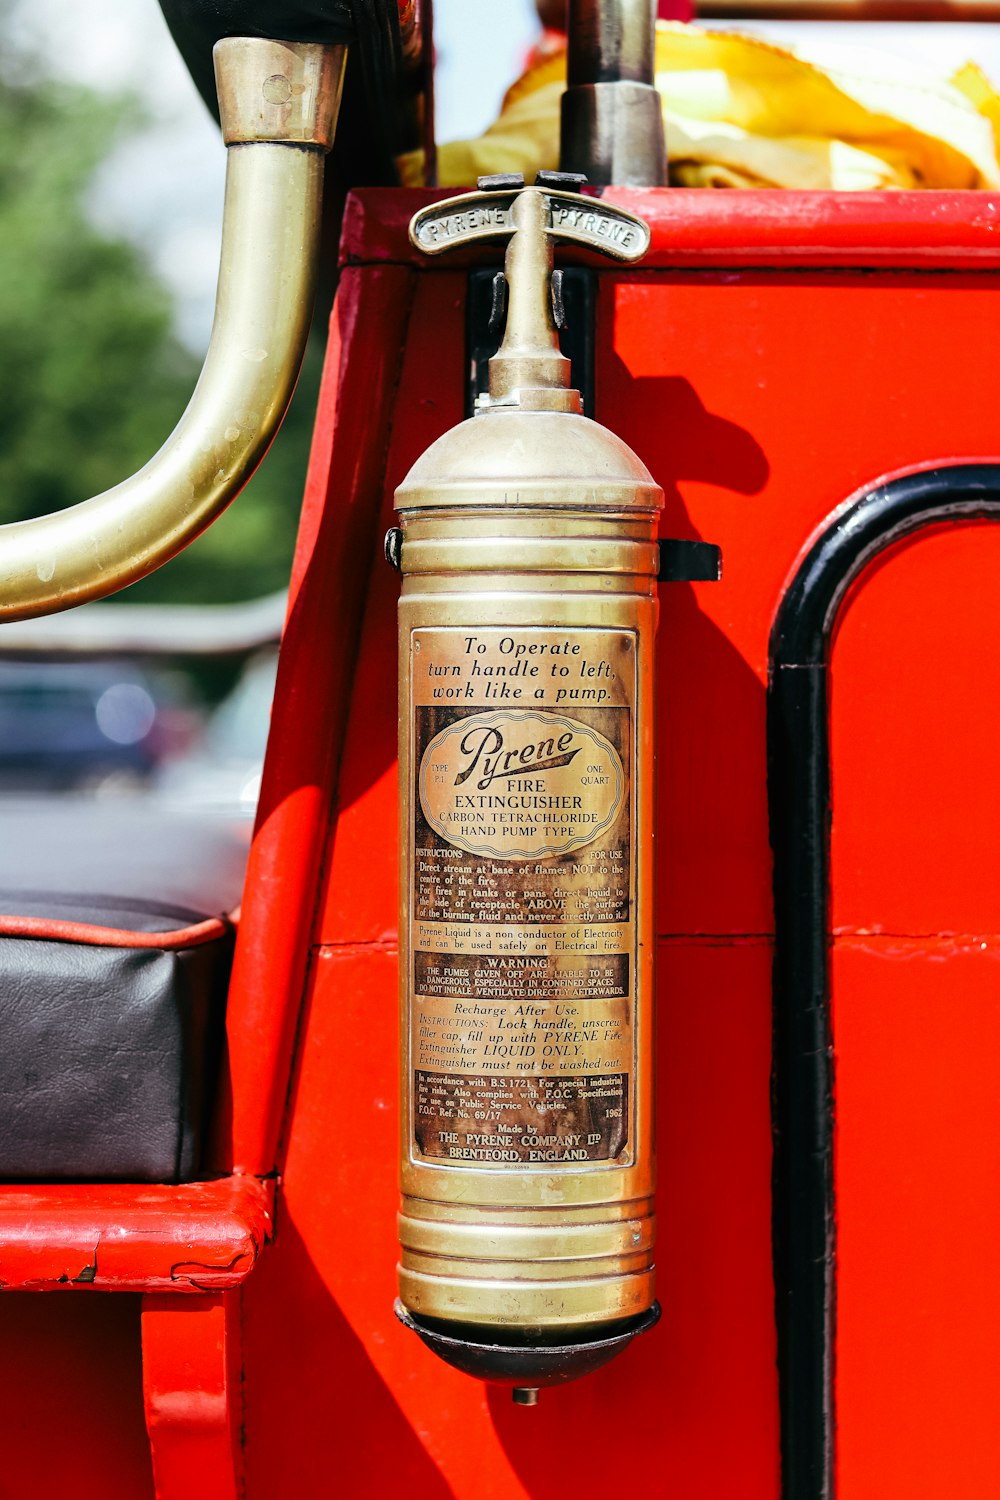 an old fashioned fire extinguisher sitting on a red truck